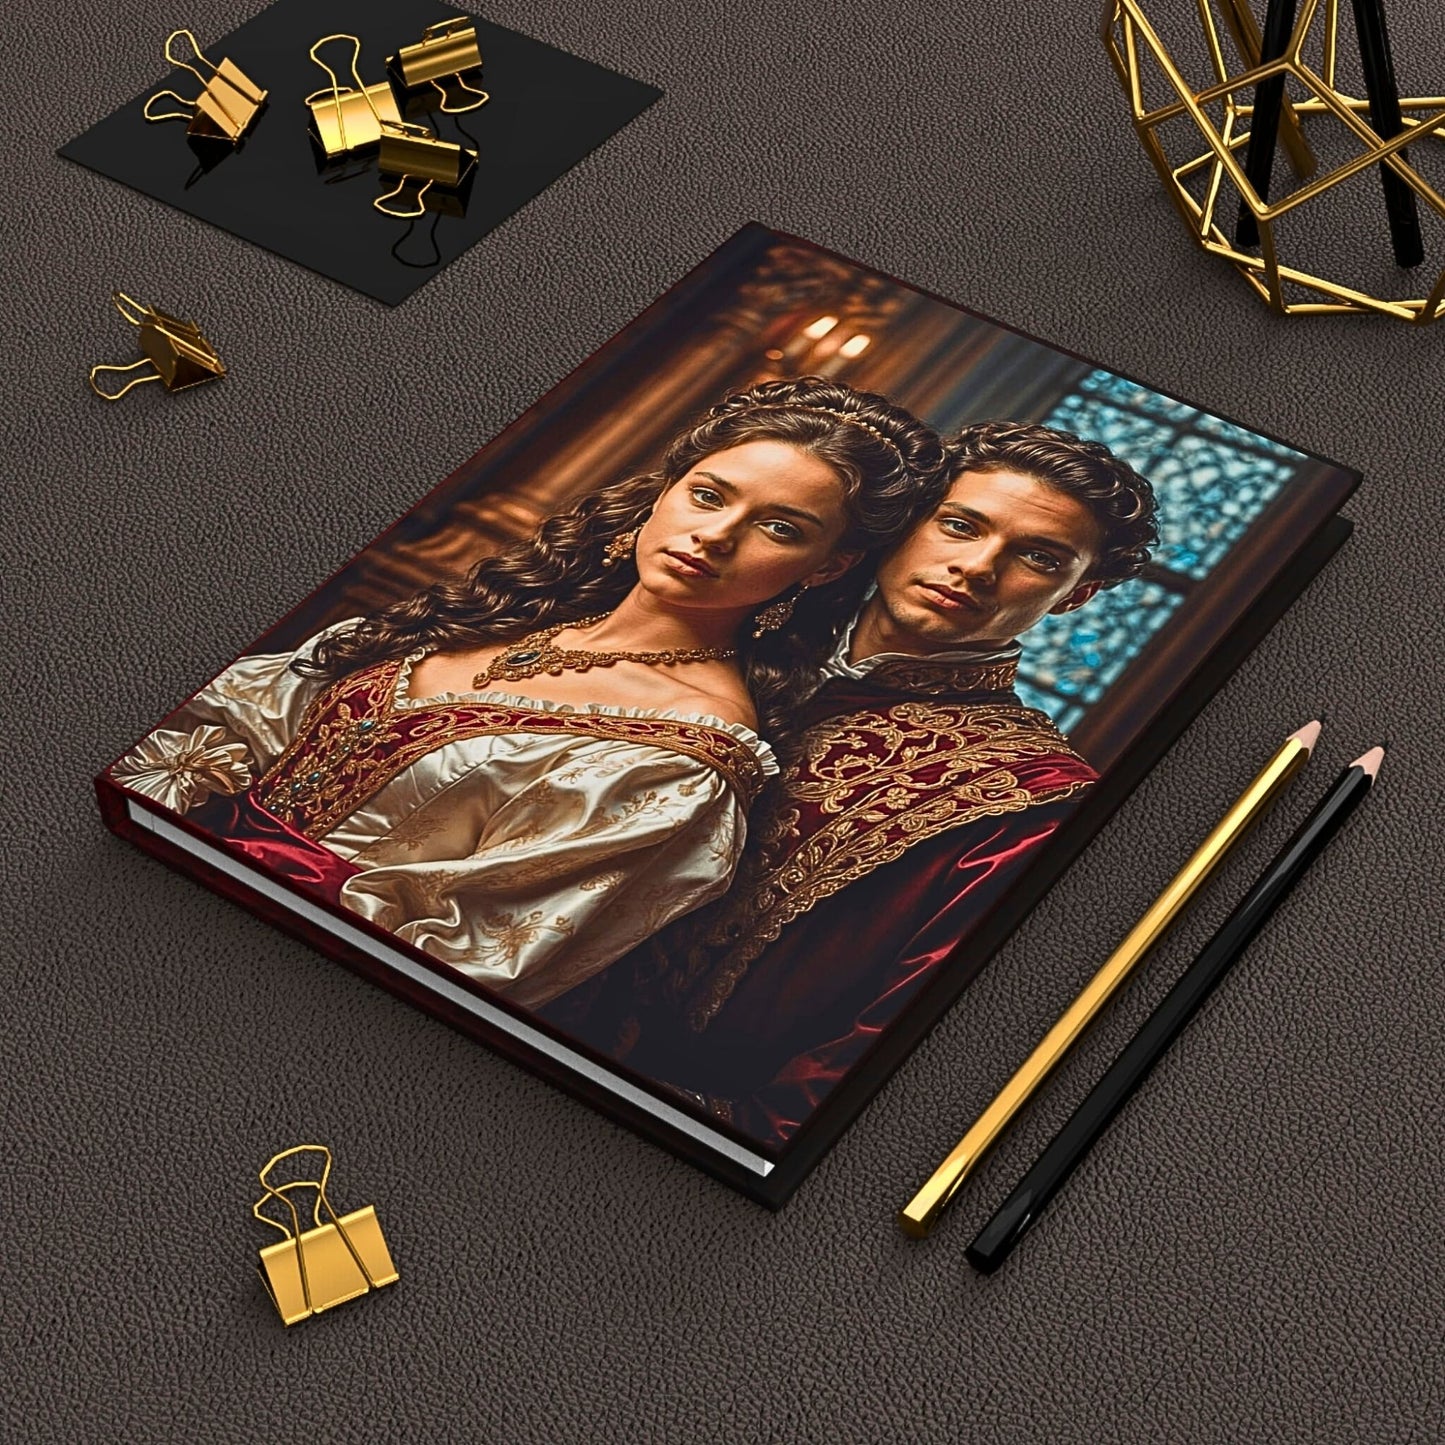 Discover our Custom Royal Couple Journal, a majestic gift perfect for birthdays, anniversaries, or Father's Day. Personalize your journal with photos and create a regal keepsake fit for kings and queens. Explore our Royal Journal Collection and celebrate your special moments with elegance and charm today!